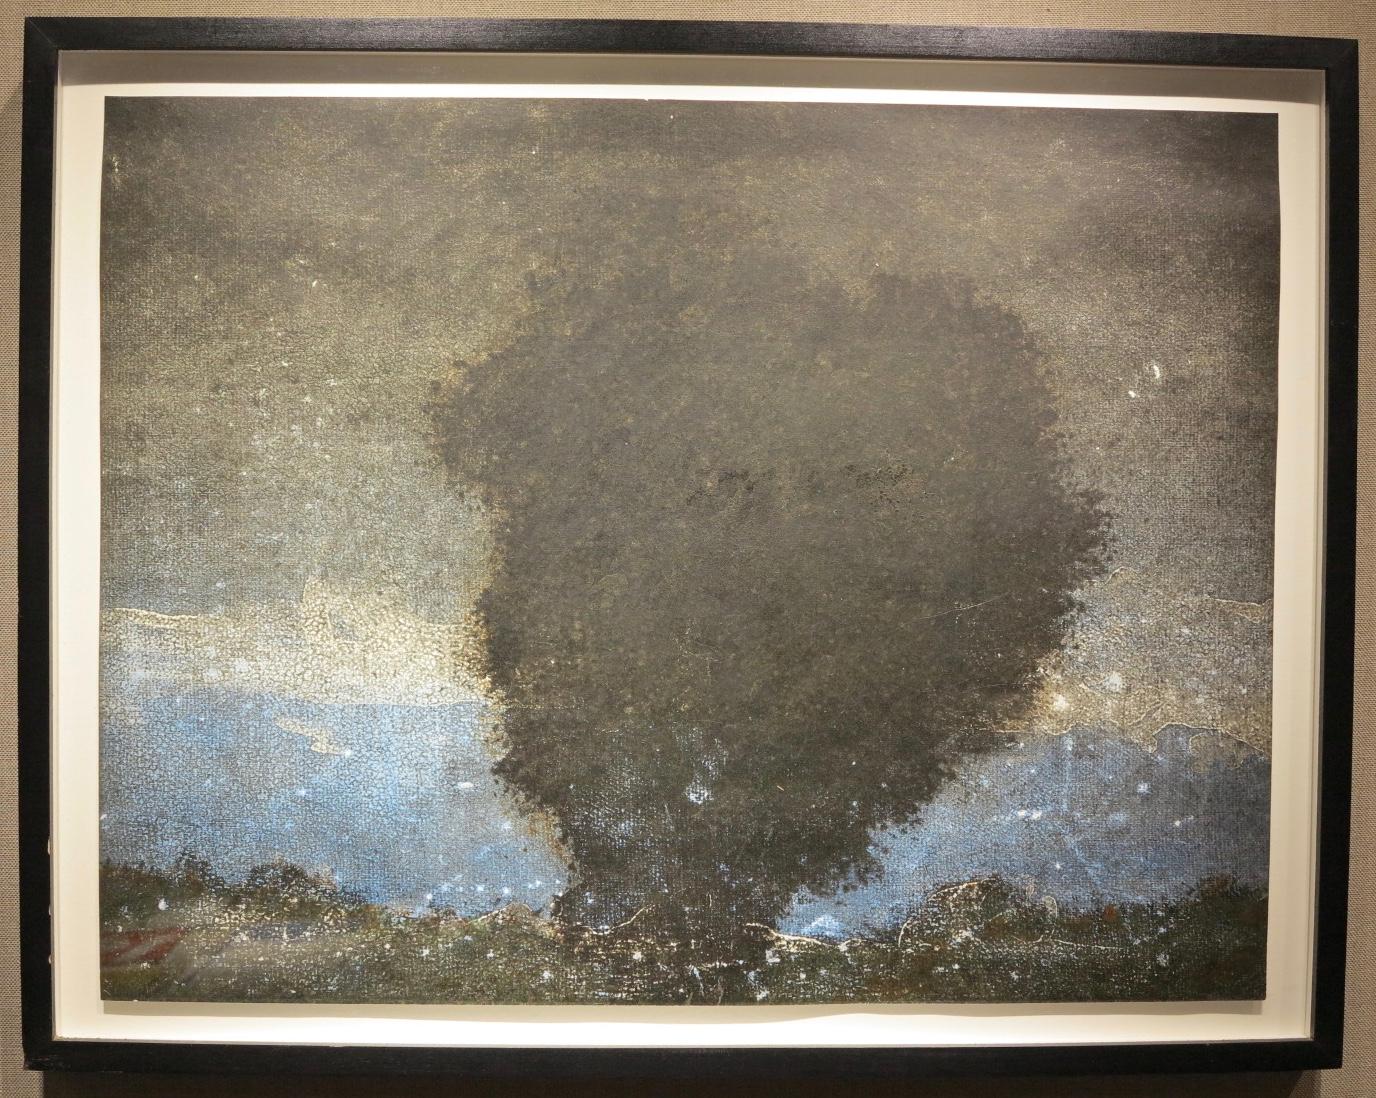 Frank Faulkner (b.1946). Obscured Landscape #2, 19 x 25 inches; 22 x 28 inches framed. Black wood frame behind UV plexiglass. Excellent condition with no damage or restoration. Signed and dated en verso. 

Born in Sumter, South Carolina in 1946,